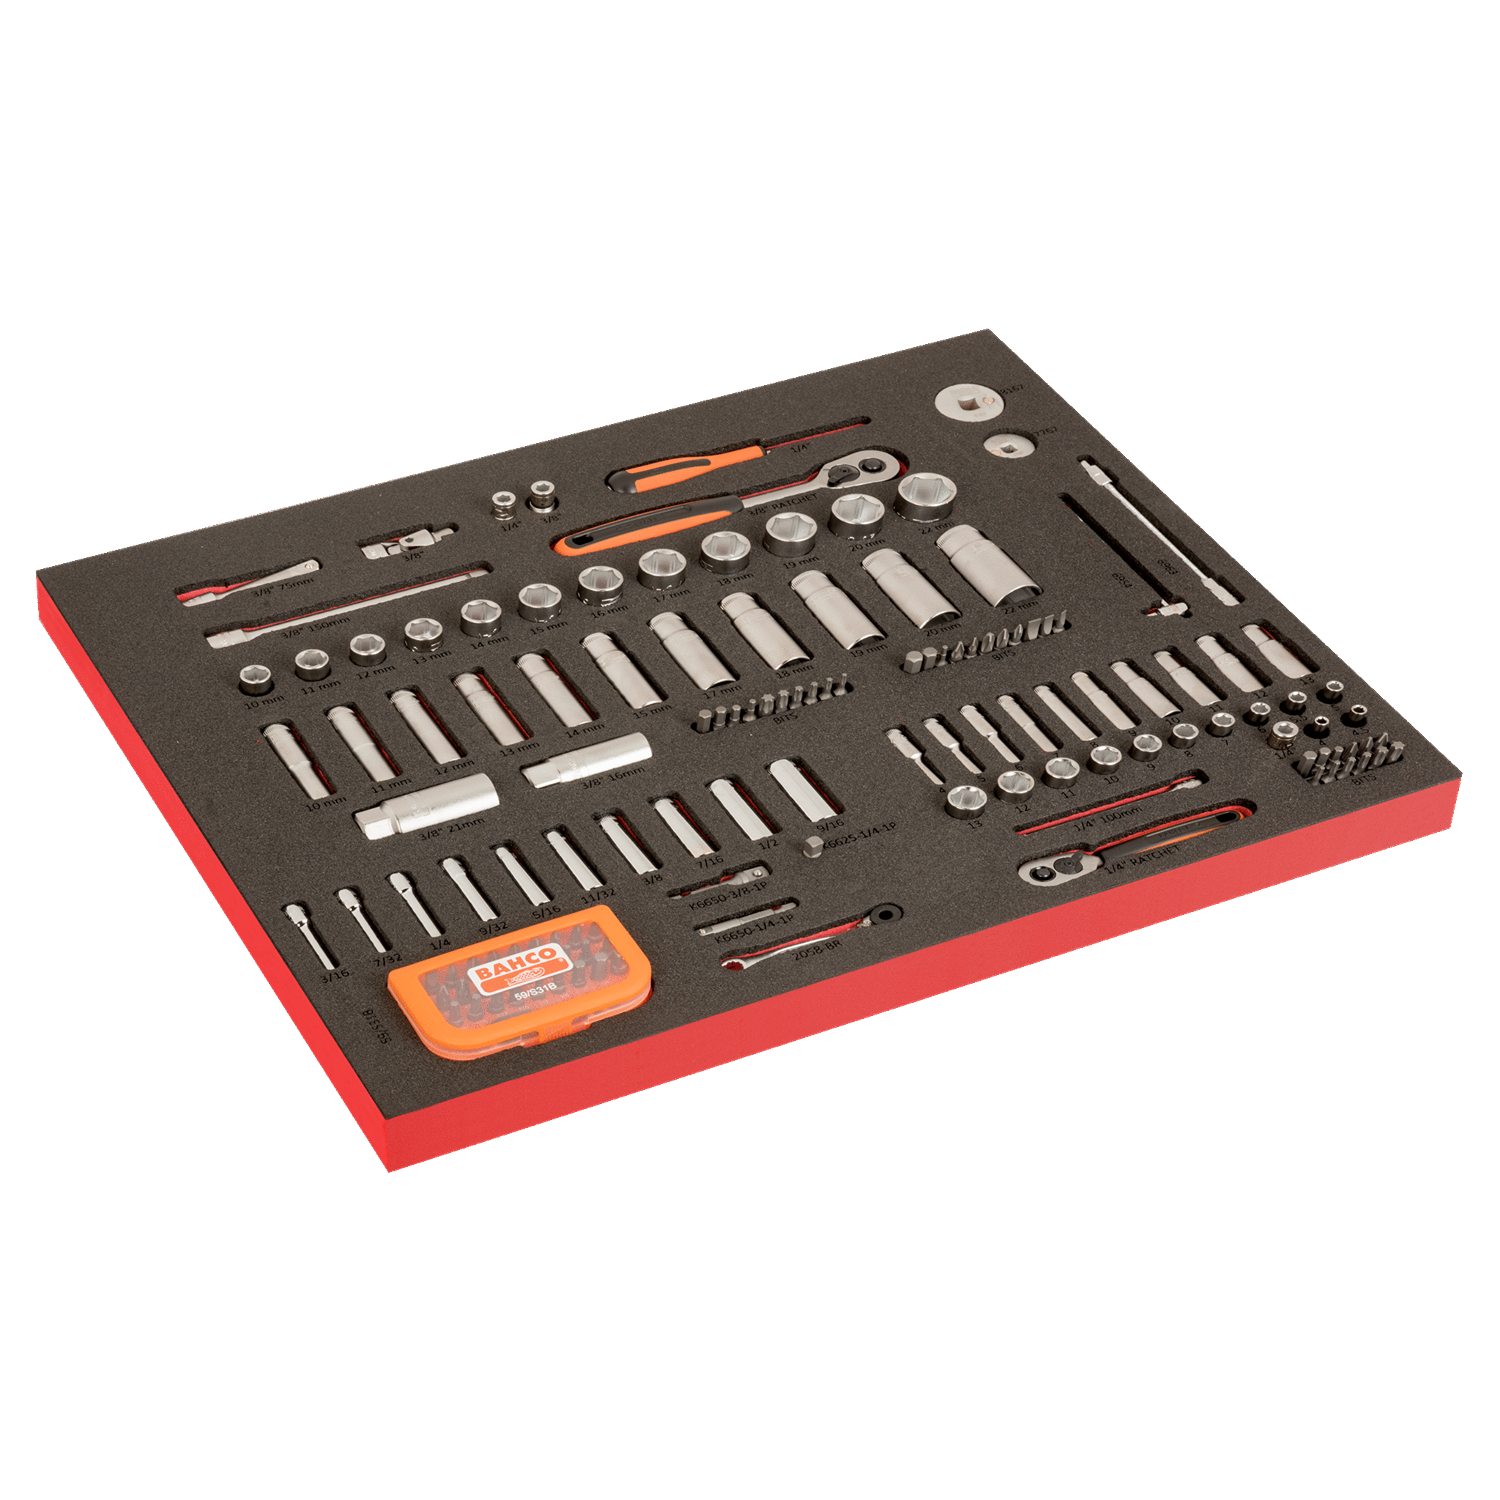 BAHCO FF1A195LM Fit&Go 3/3 Foam Socket and Screwdriver Bit Set - Premium Socket and Screwdriver Bit Set from BAHCO - Shop now at Yew Aik.